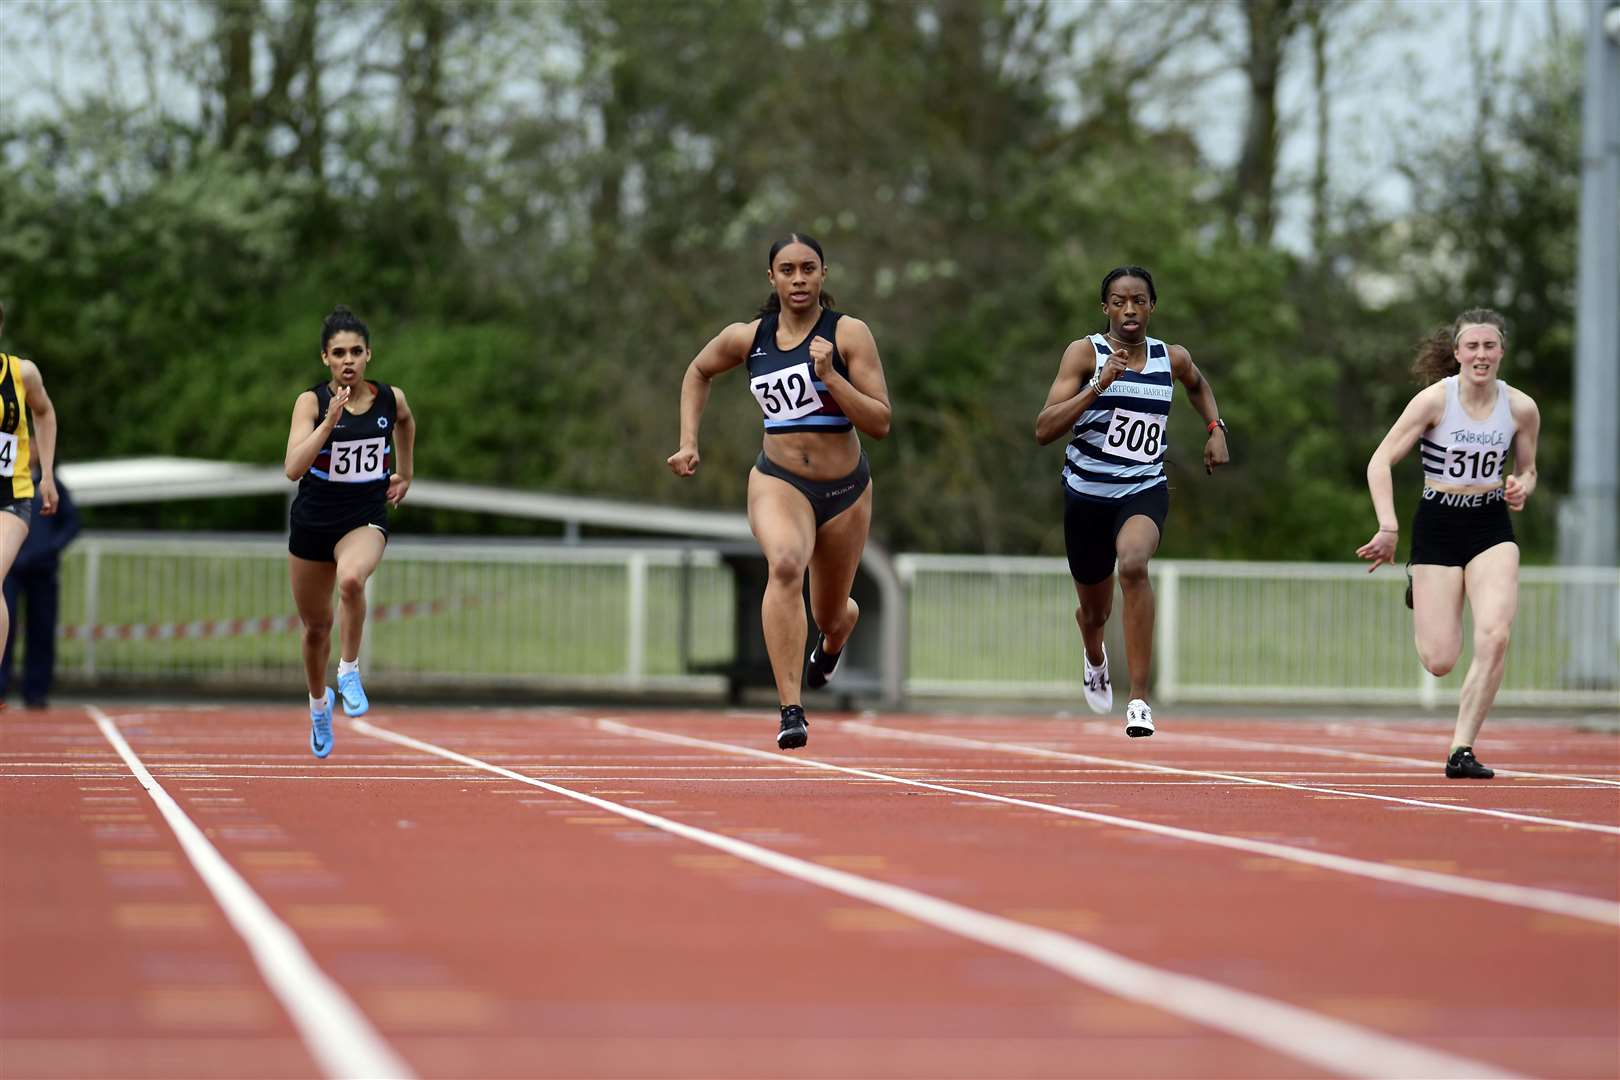 Kaliyah Young (Blackheath & Bromley) leads the field towards the line in the 200m u20 women's race Picture: Barry Goodwin